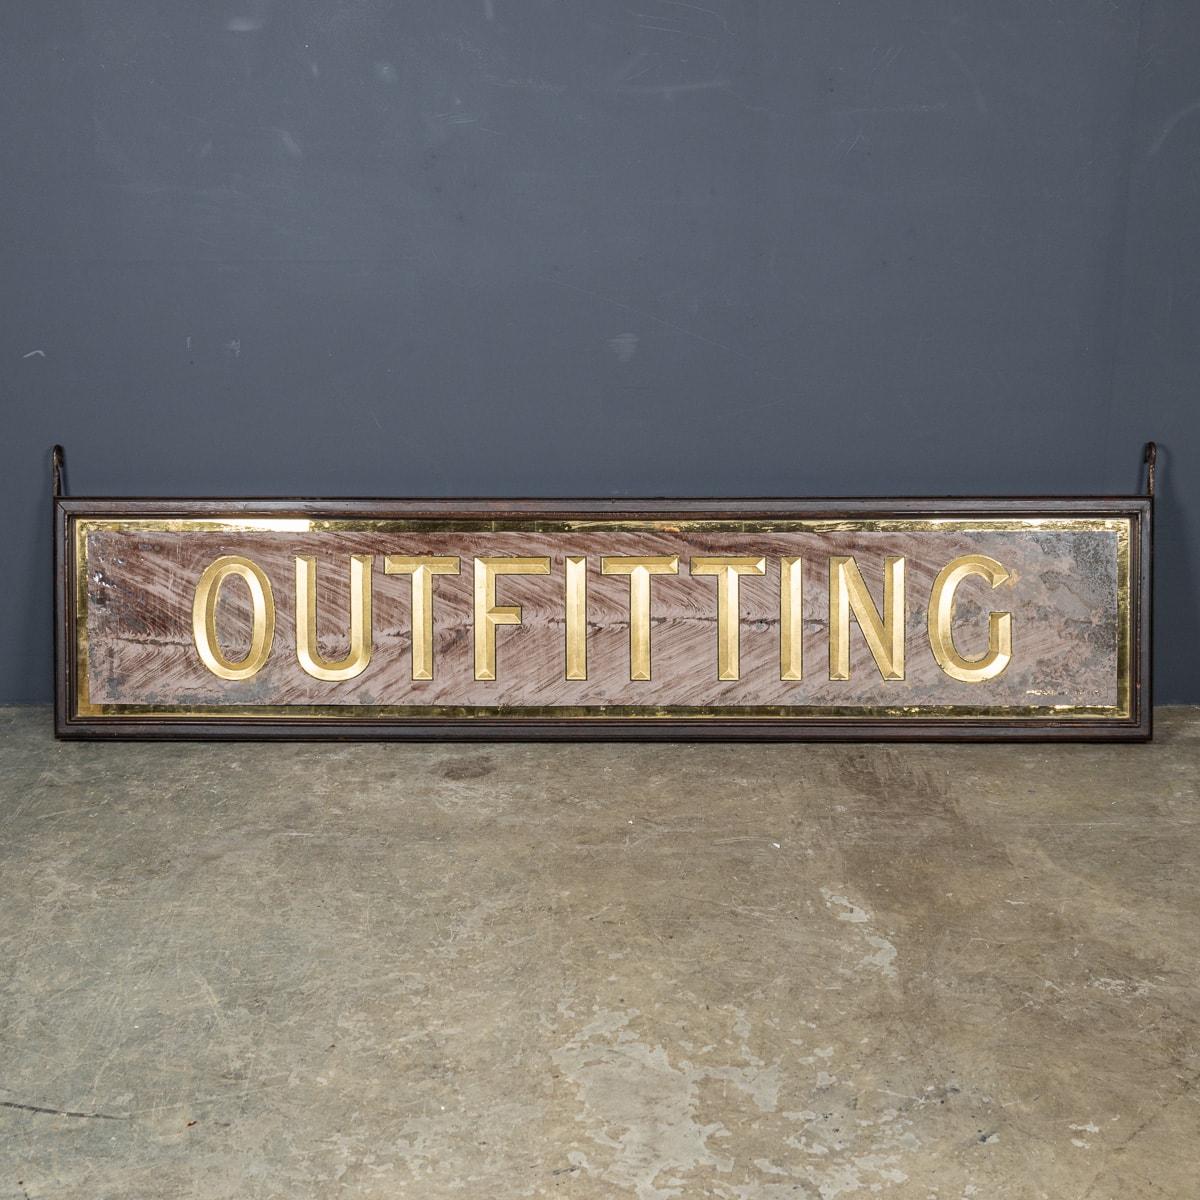 A wonderful early-20th Century Victorian mirrored reverse painted outfitting sign from Harris Tweed Outfitters. This sign with painted gold letters on a pale pink textured background with a gold border. Boxed in with mahogany, static iron hooks